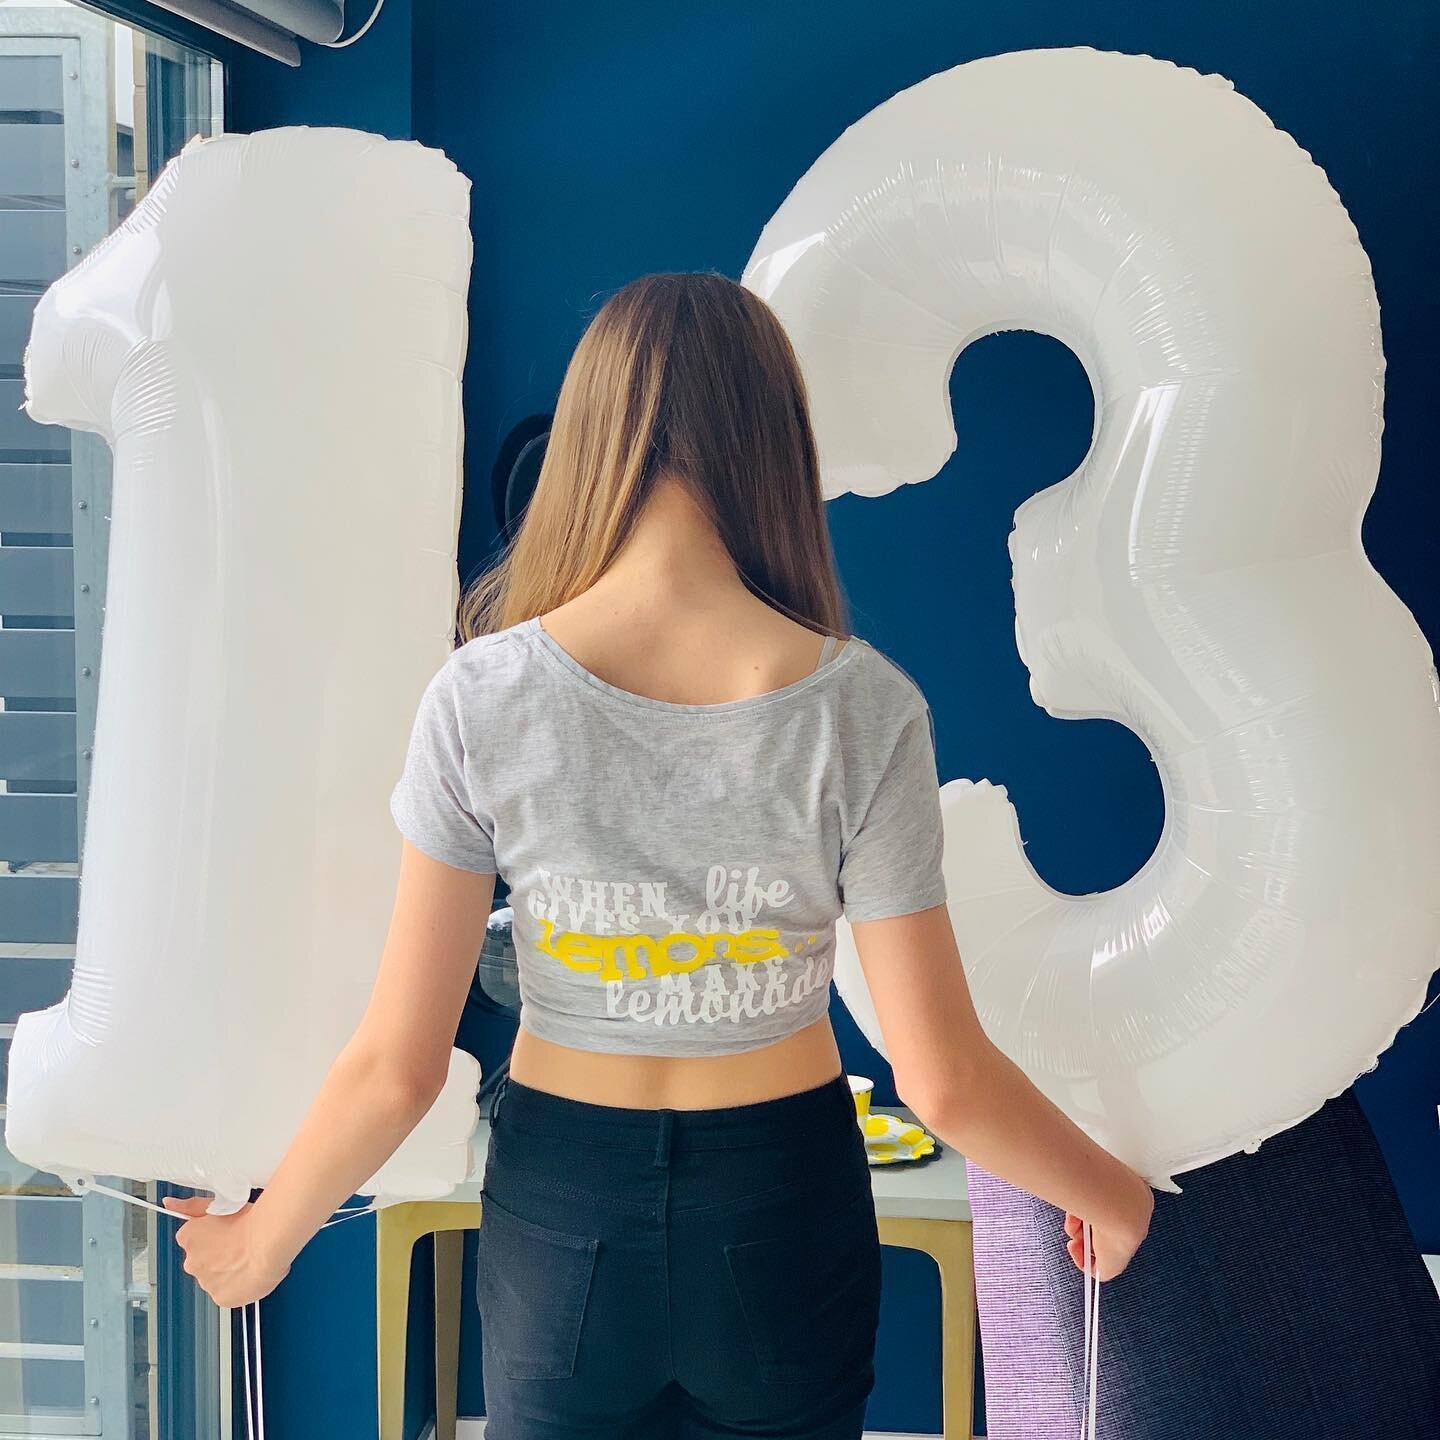 Giant white number balloons and a custom made &lsquo;when life gives you lemons, make lemonade&rsquo; T-shirt. Looking pretty good for a quaran&rsquo;teen&rsquo;ager birthday!! 🍋